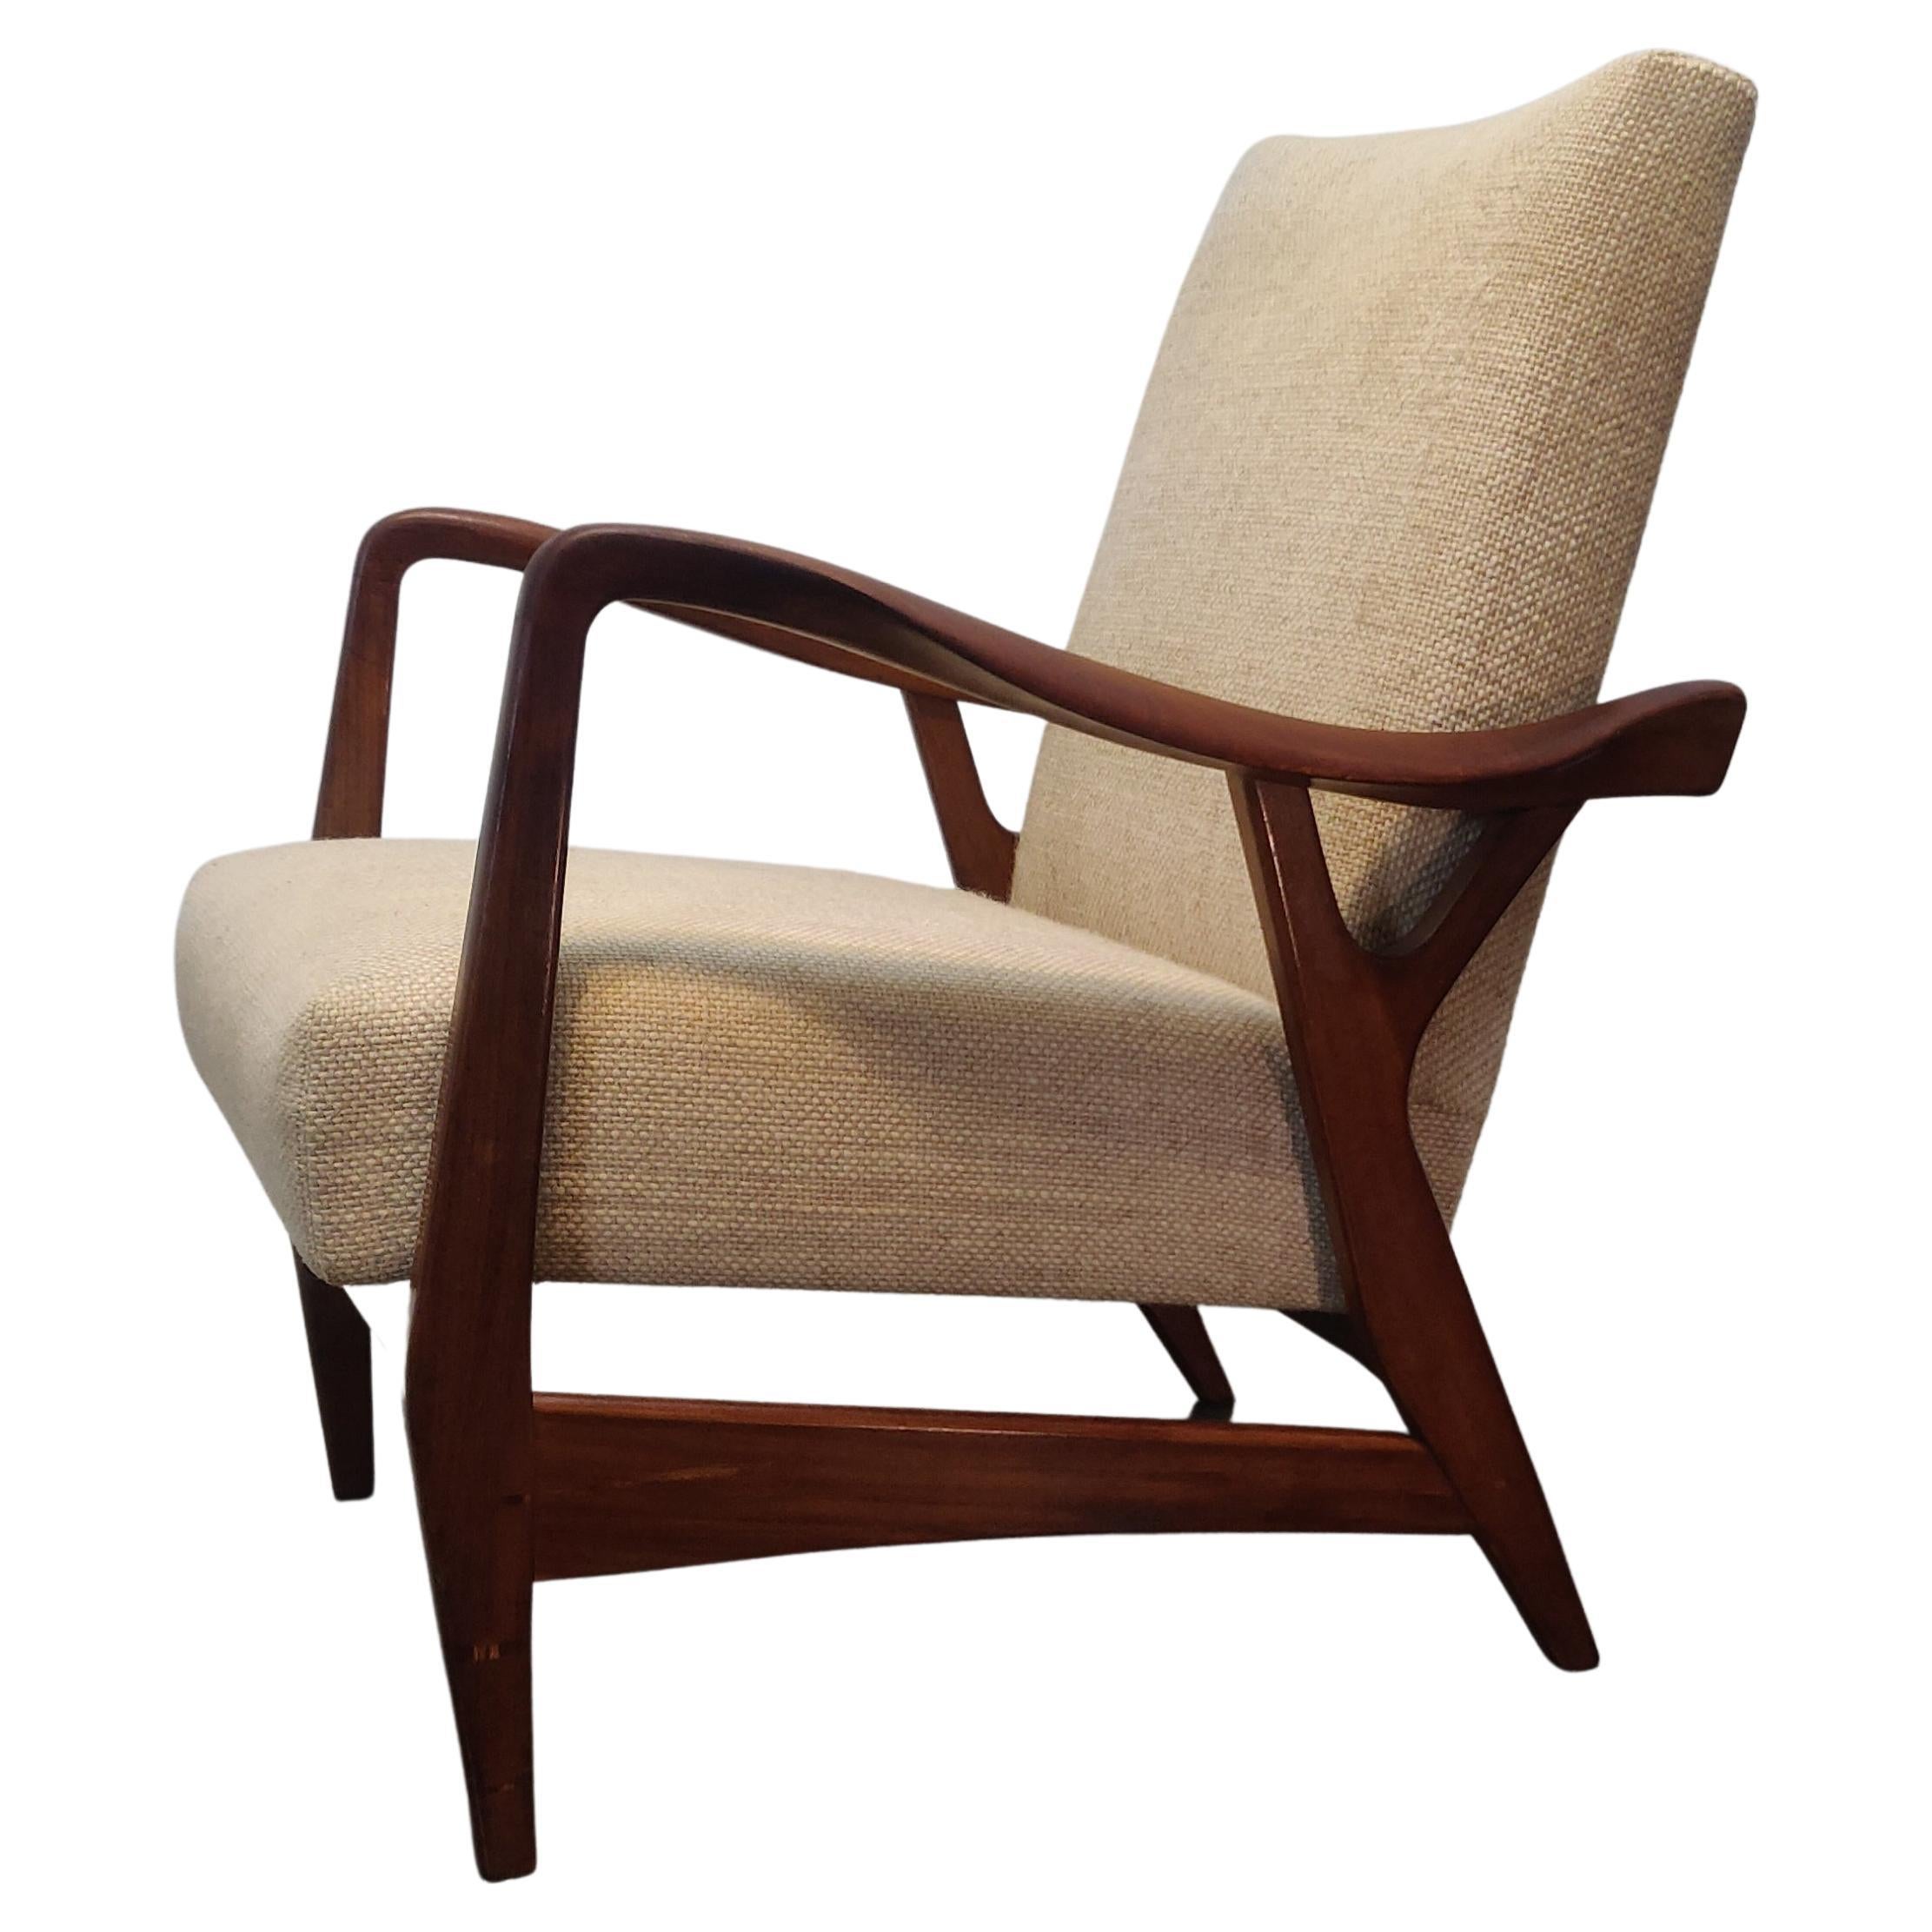 Organic Shaped Massive Teak Lounge Chair by Topform, 1950s, 2 Pieces  Available For Sale at 1stDibs | organic lounge chair